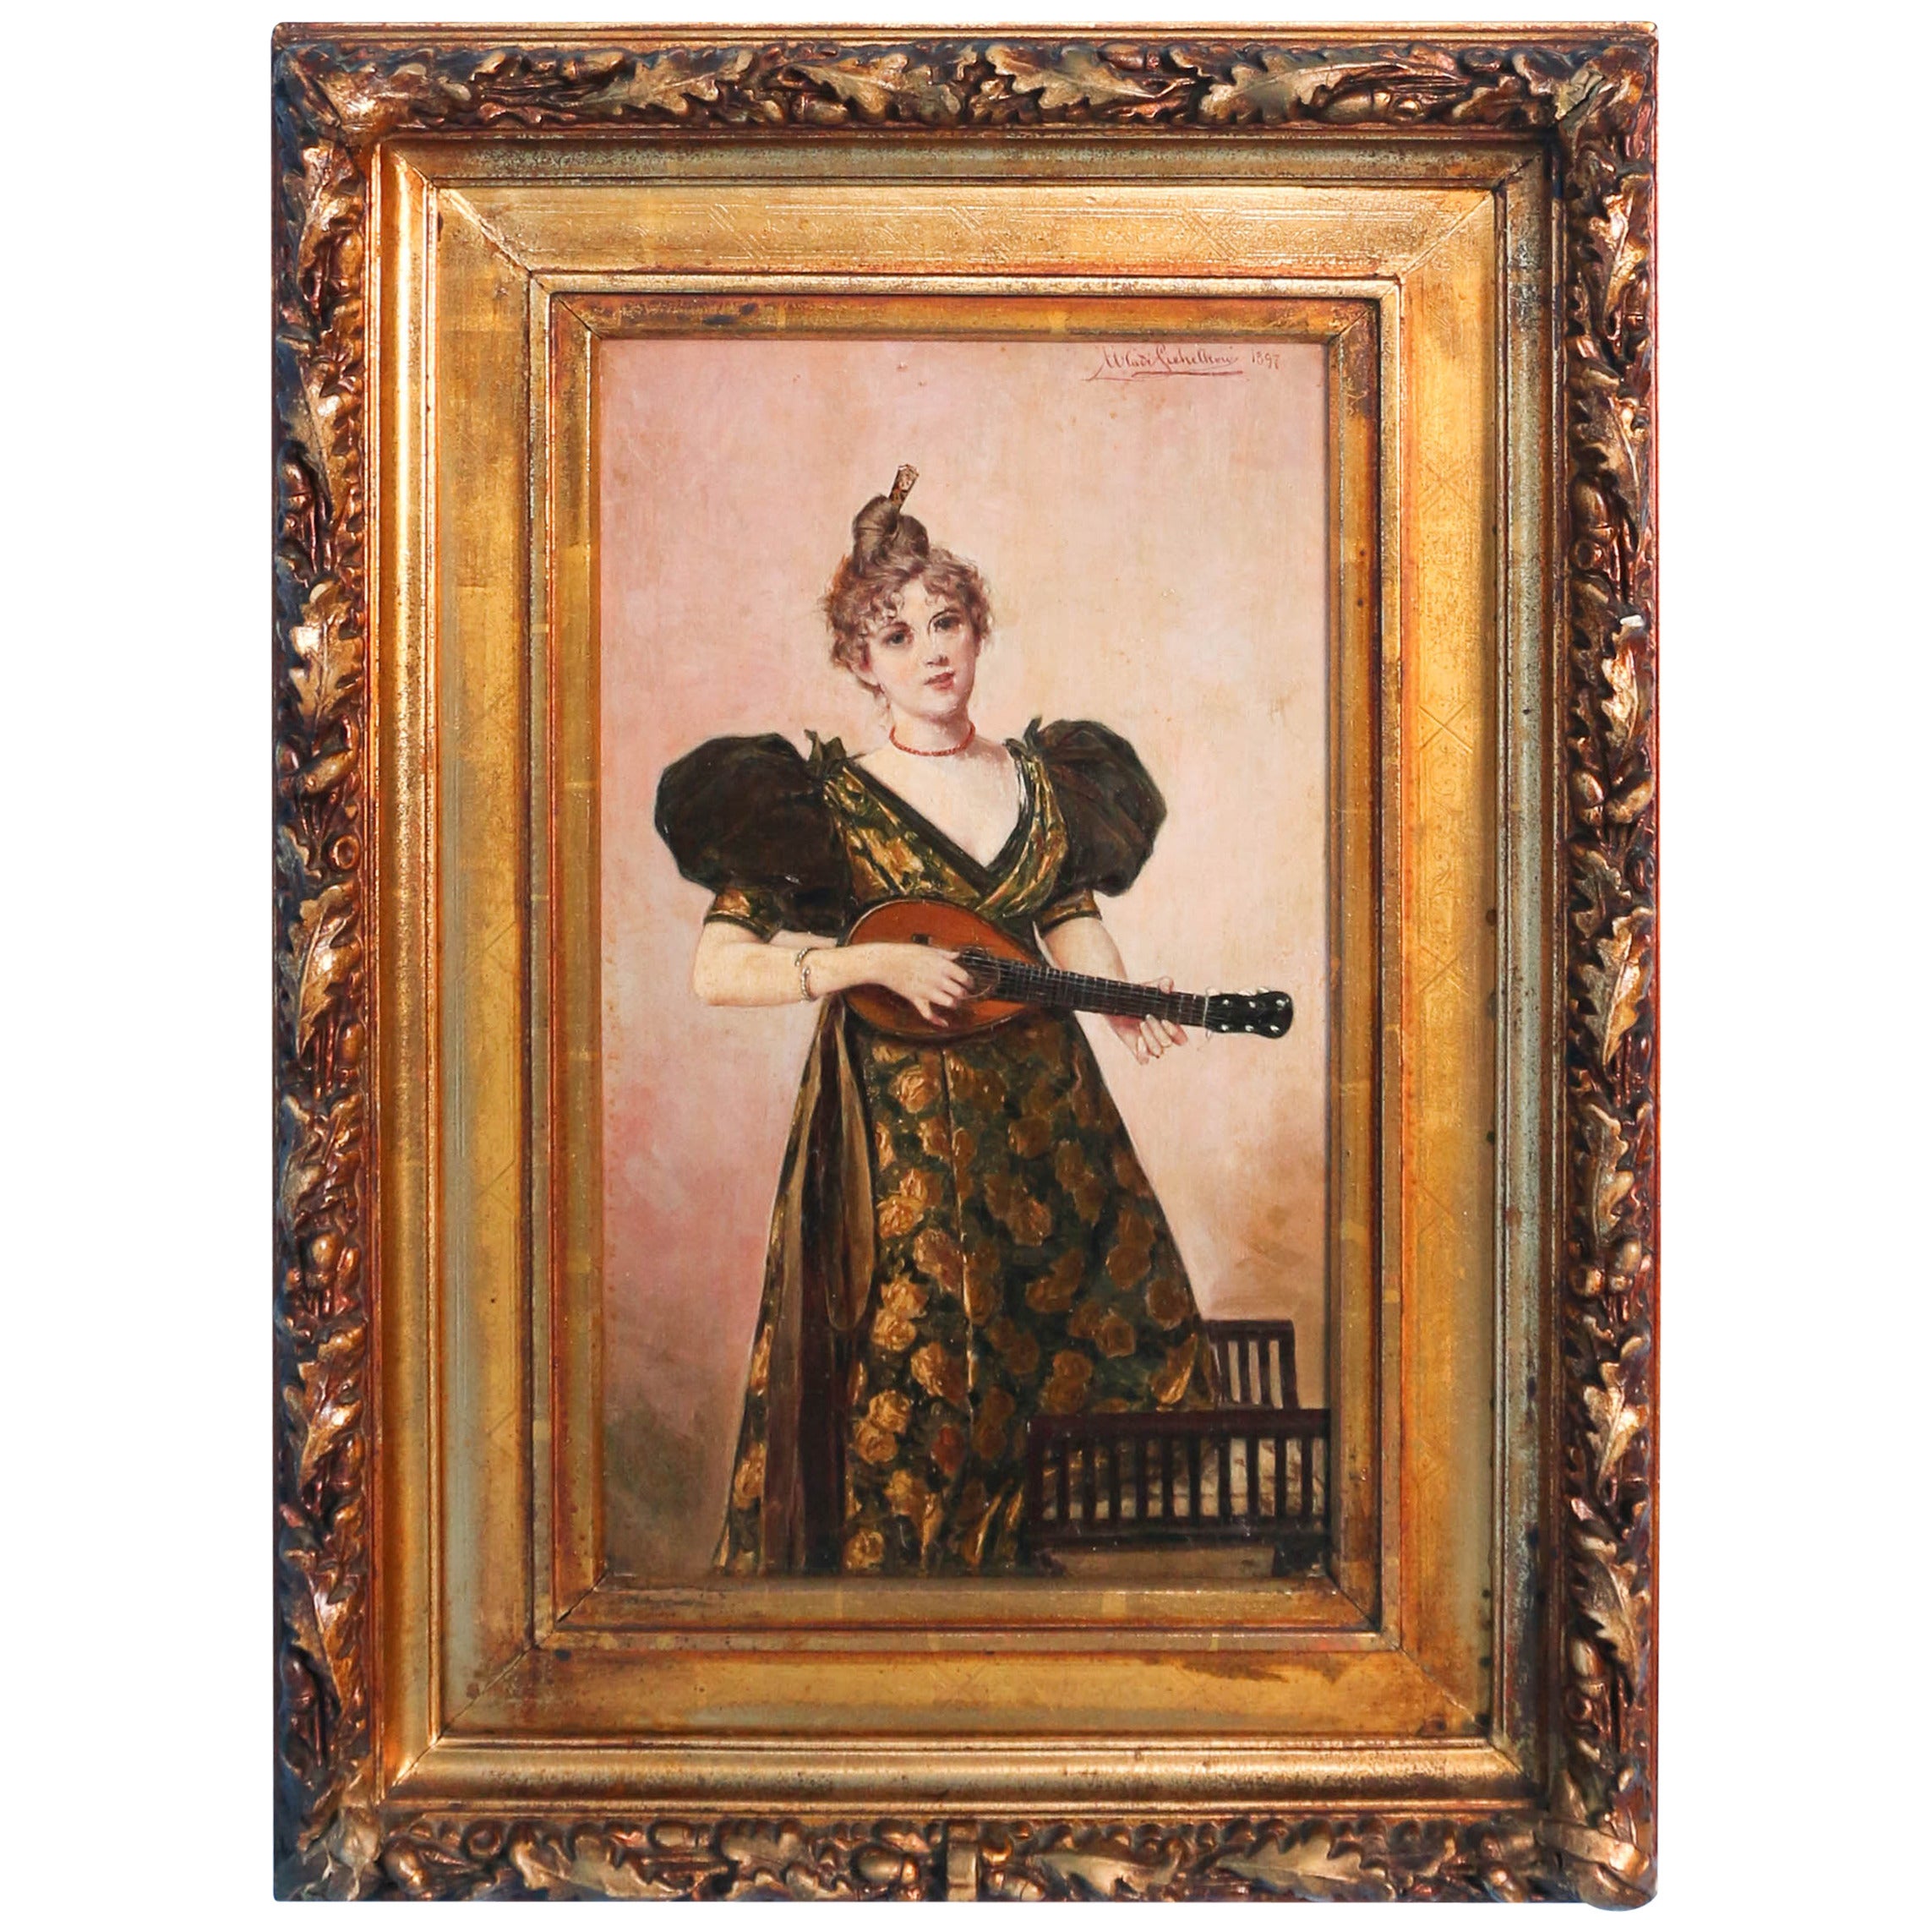 Original Oil on Wood Painting of Young Woman Playing Musical Instrument